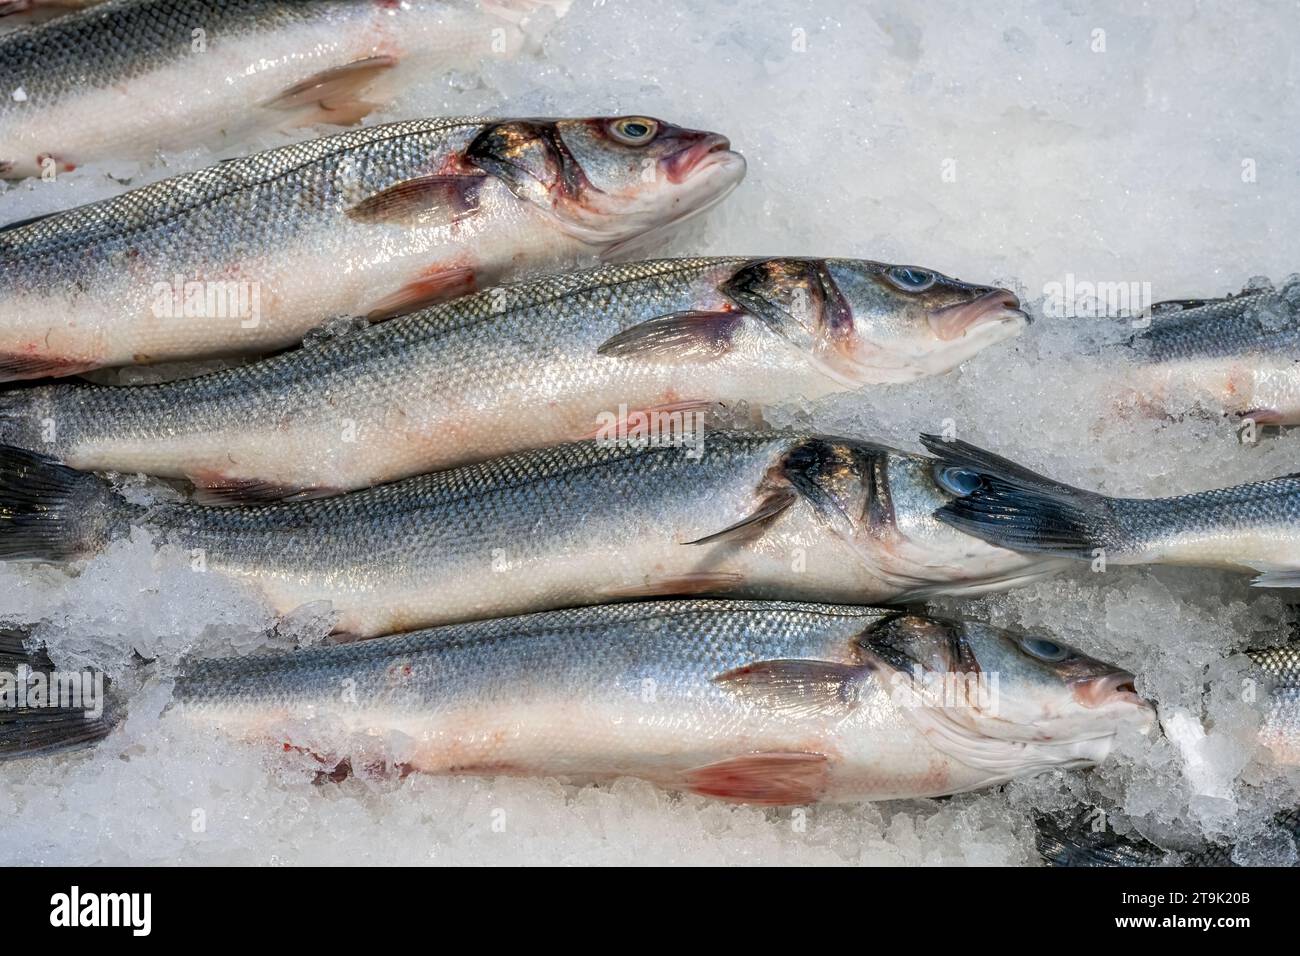 Fresh catch of fish for sale at a market Stock Photo